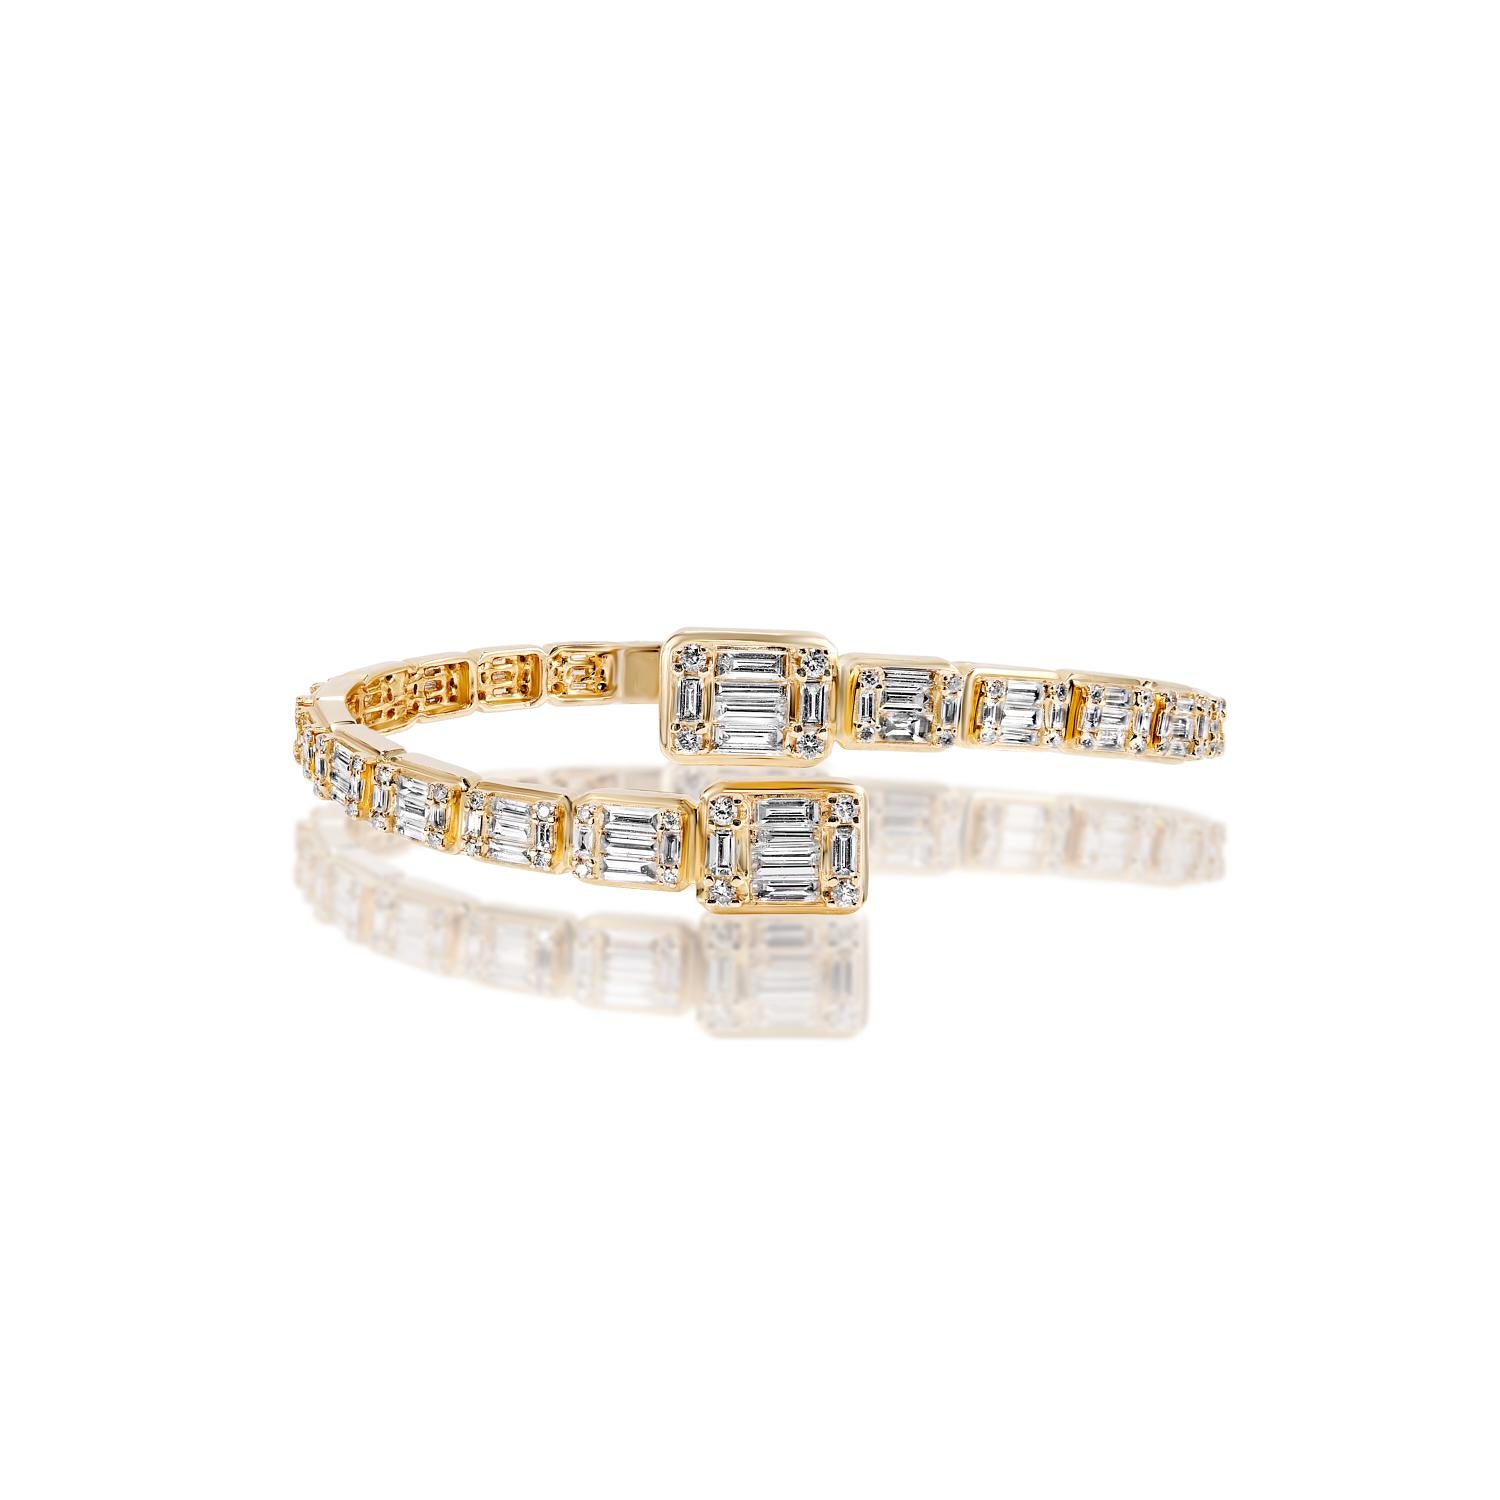 The FRANCIS Men’s 5 Carat Diamond Bangle Bracelet features COMBINE MIX SHAPE DIAMONDS brilliants weighing a total of approximately 5.15 carats, set in 14K Yellow Gold.


Style:
Diamonds
Diamond Size: 5.15 Carats
Diamond Shape: Combine Mix